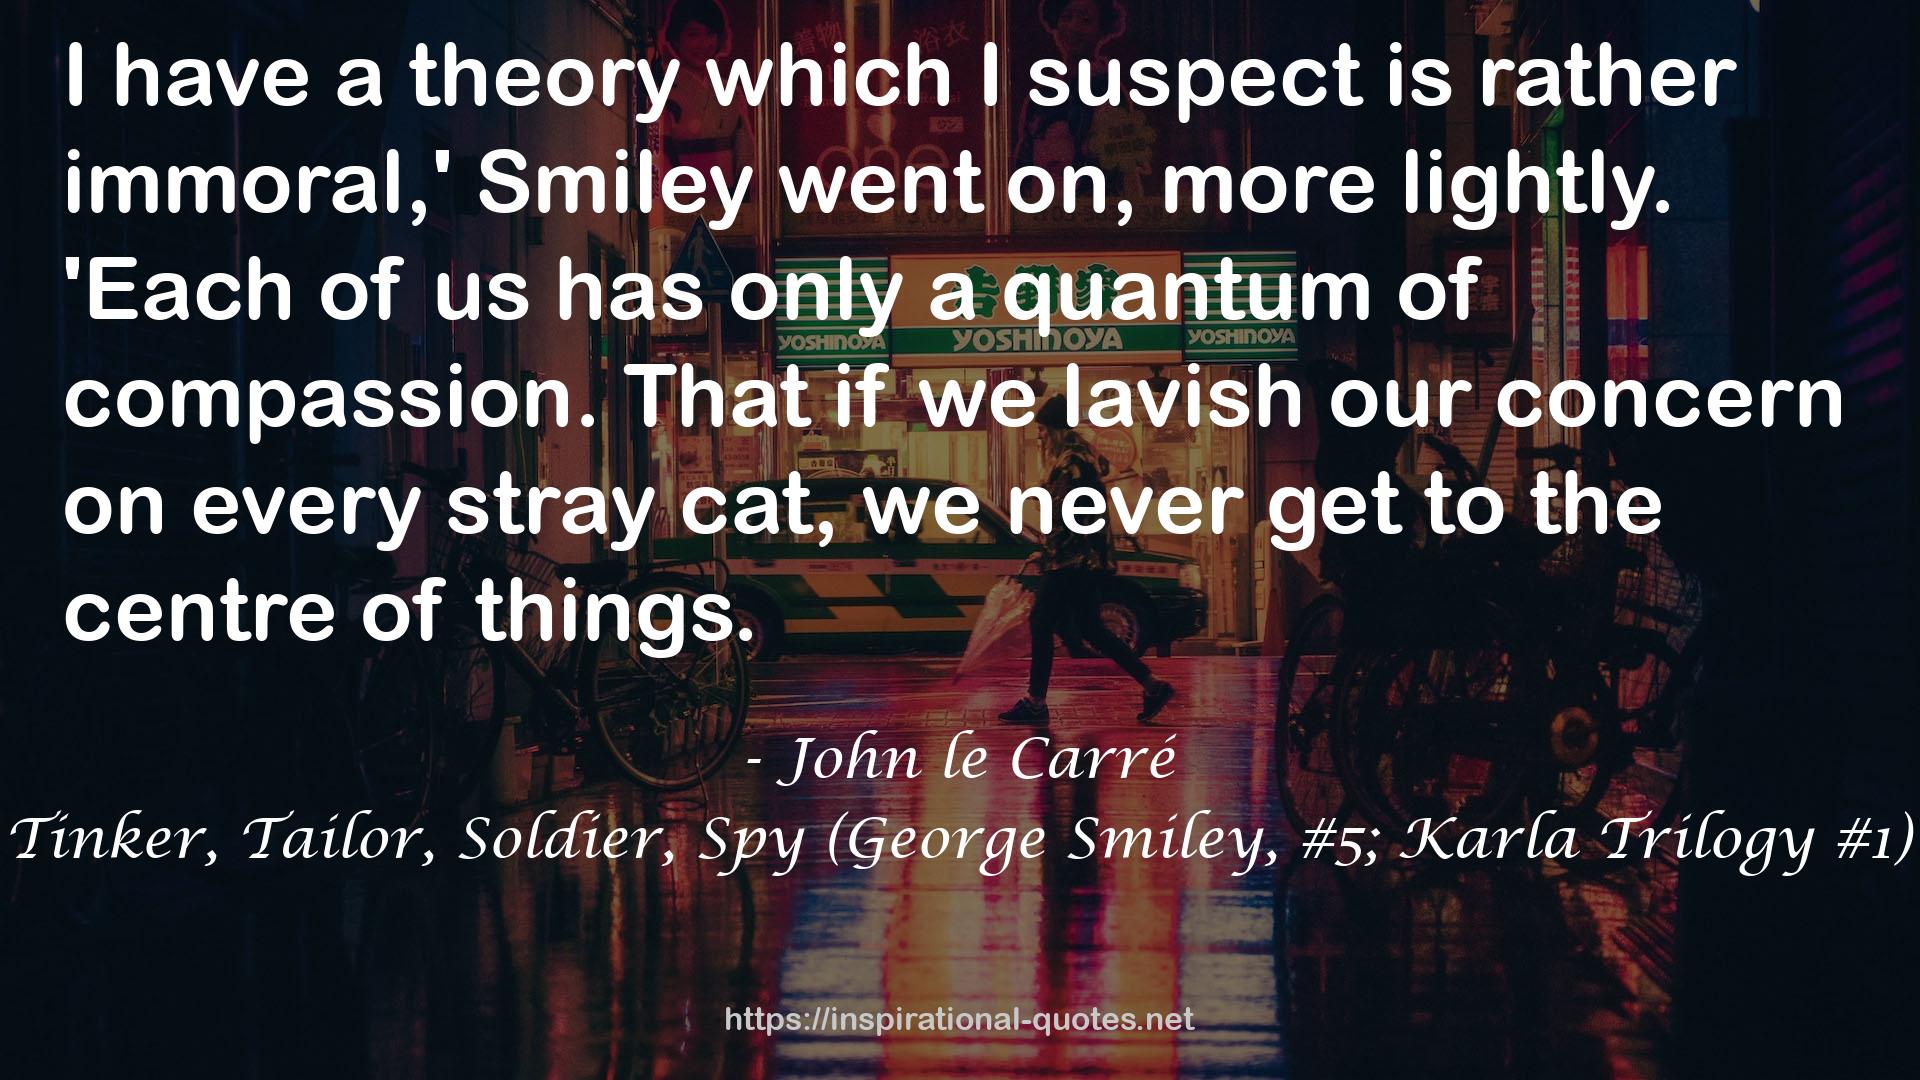 Tinker, Tailor, Soldier, Spy (George Smiley, #5; Karla Trilogy #1) QUOTES